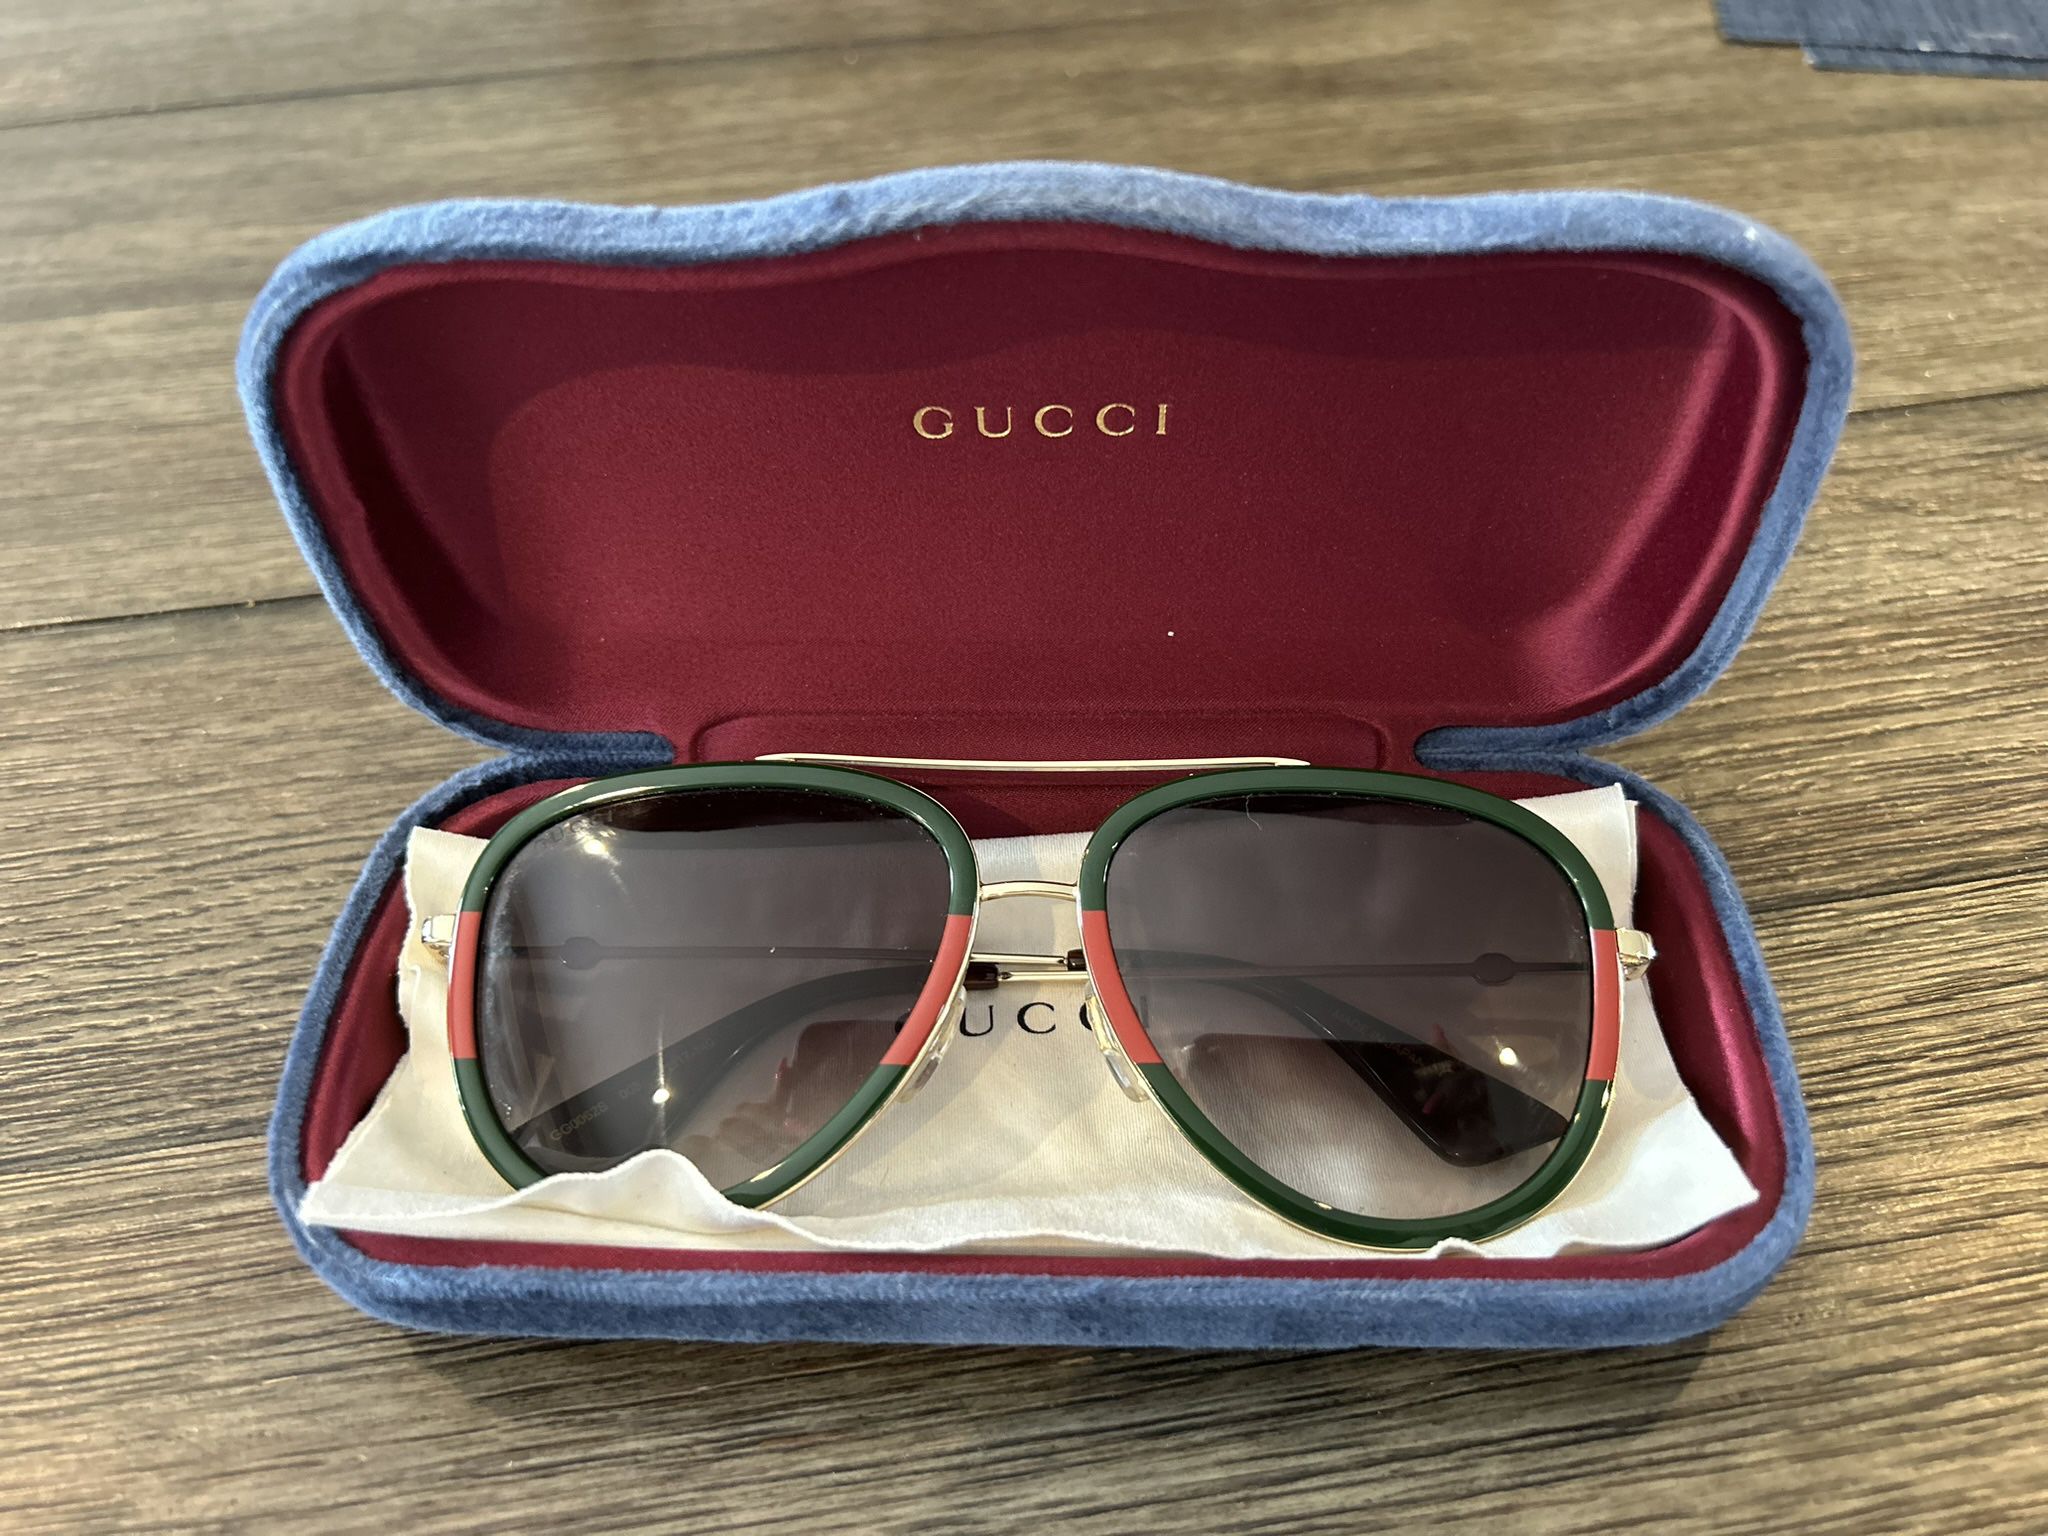 Gucci Glasses, Aviator Style With Gucci Colors Green, Red And Ahold Metal Frame 